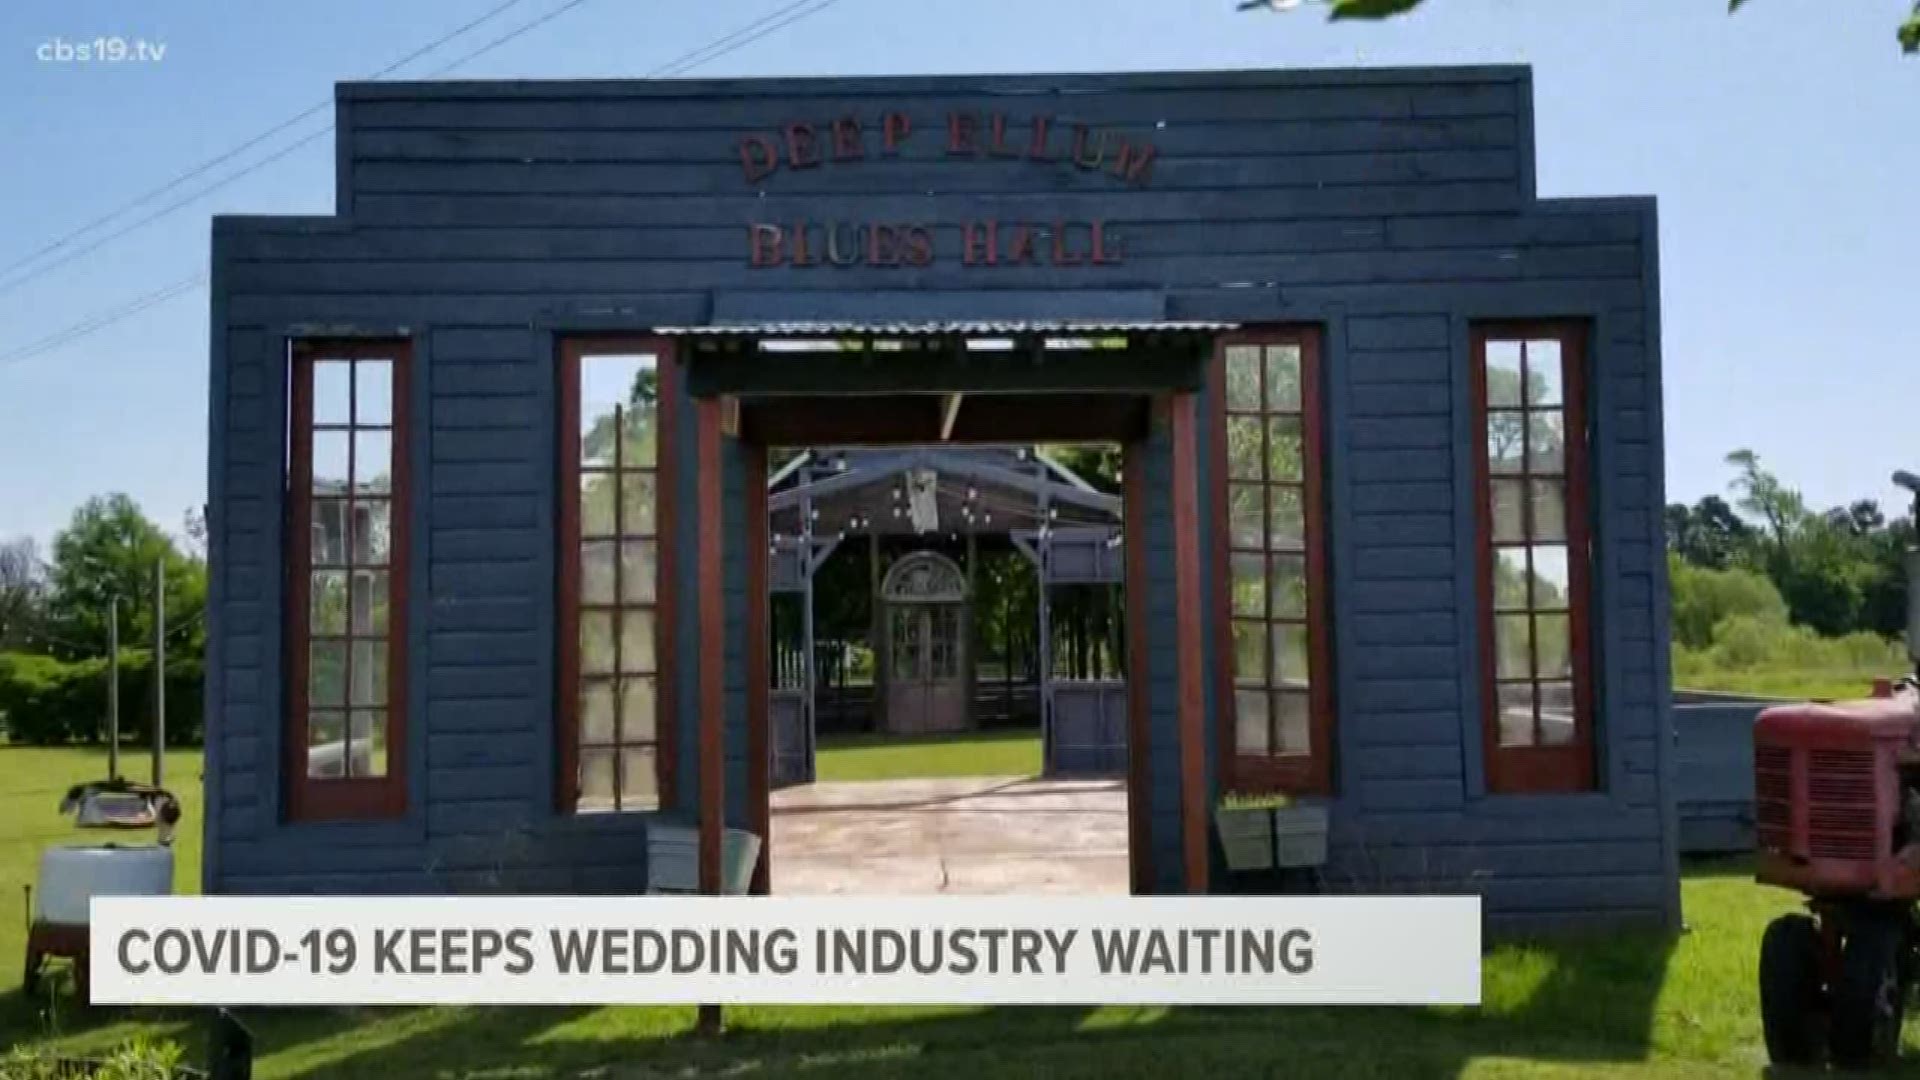 An East Texas wedding venue says they'll be ready for business as of Friday, May 1st.